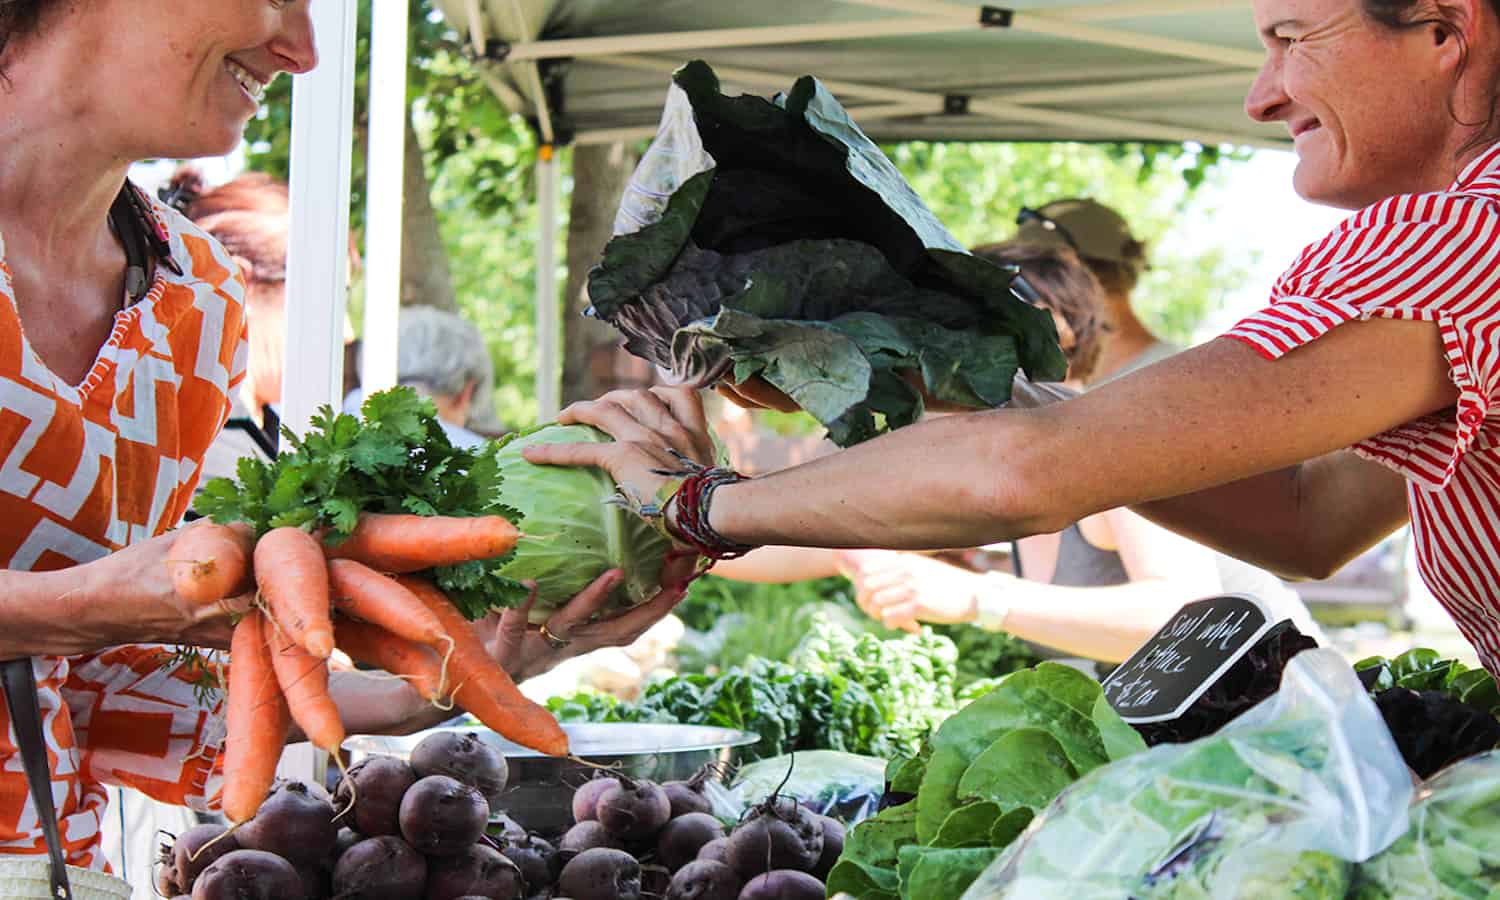 The Farmers Market Alliance of New South Wales is helping to build successful and authentic farmers markets in Australia.